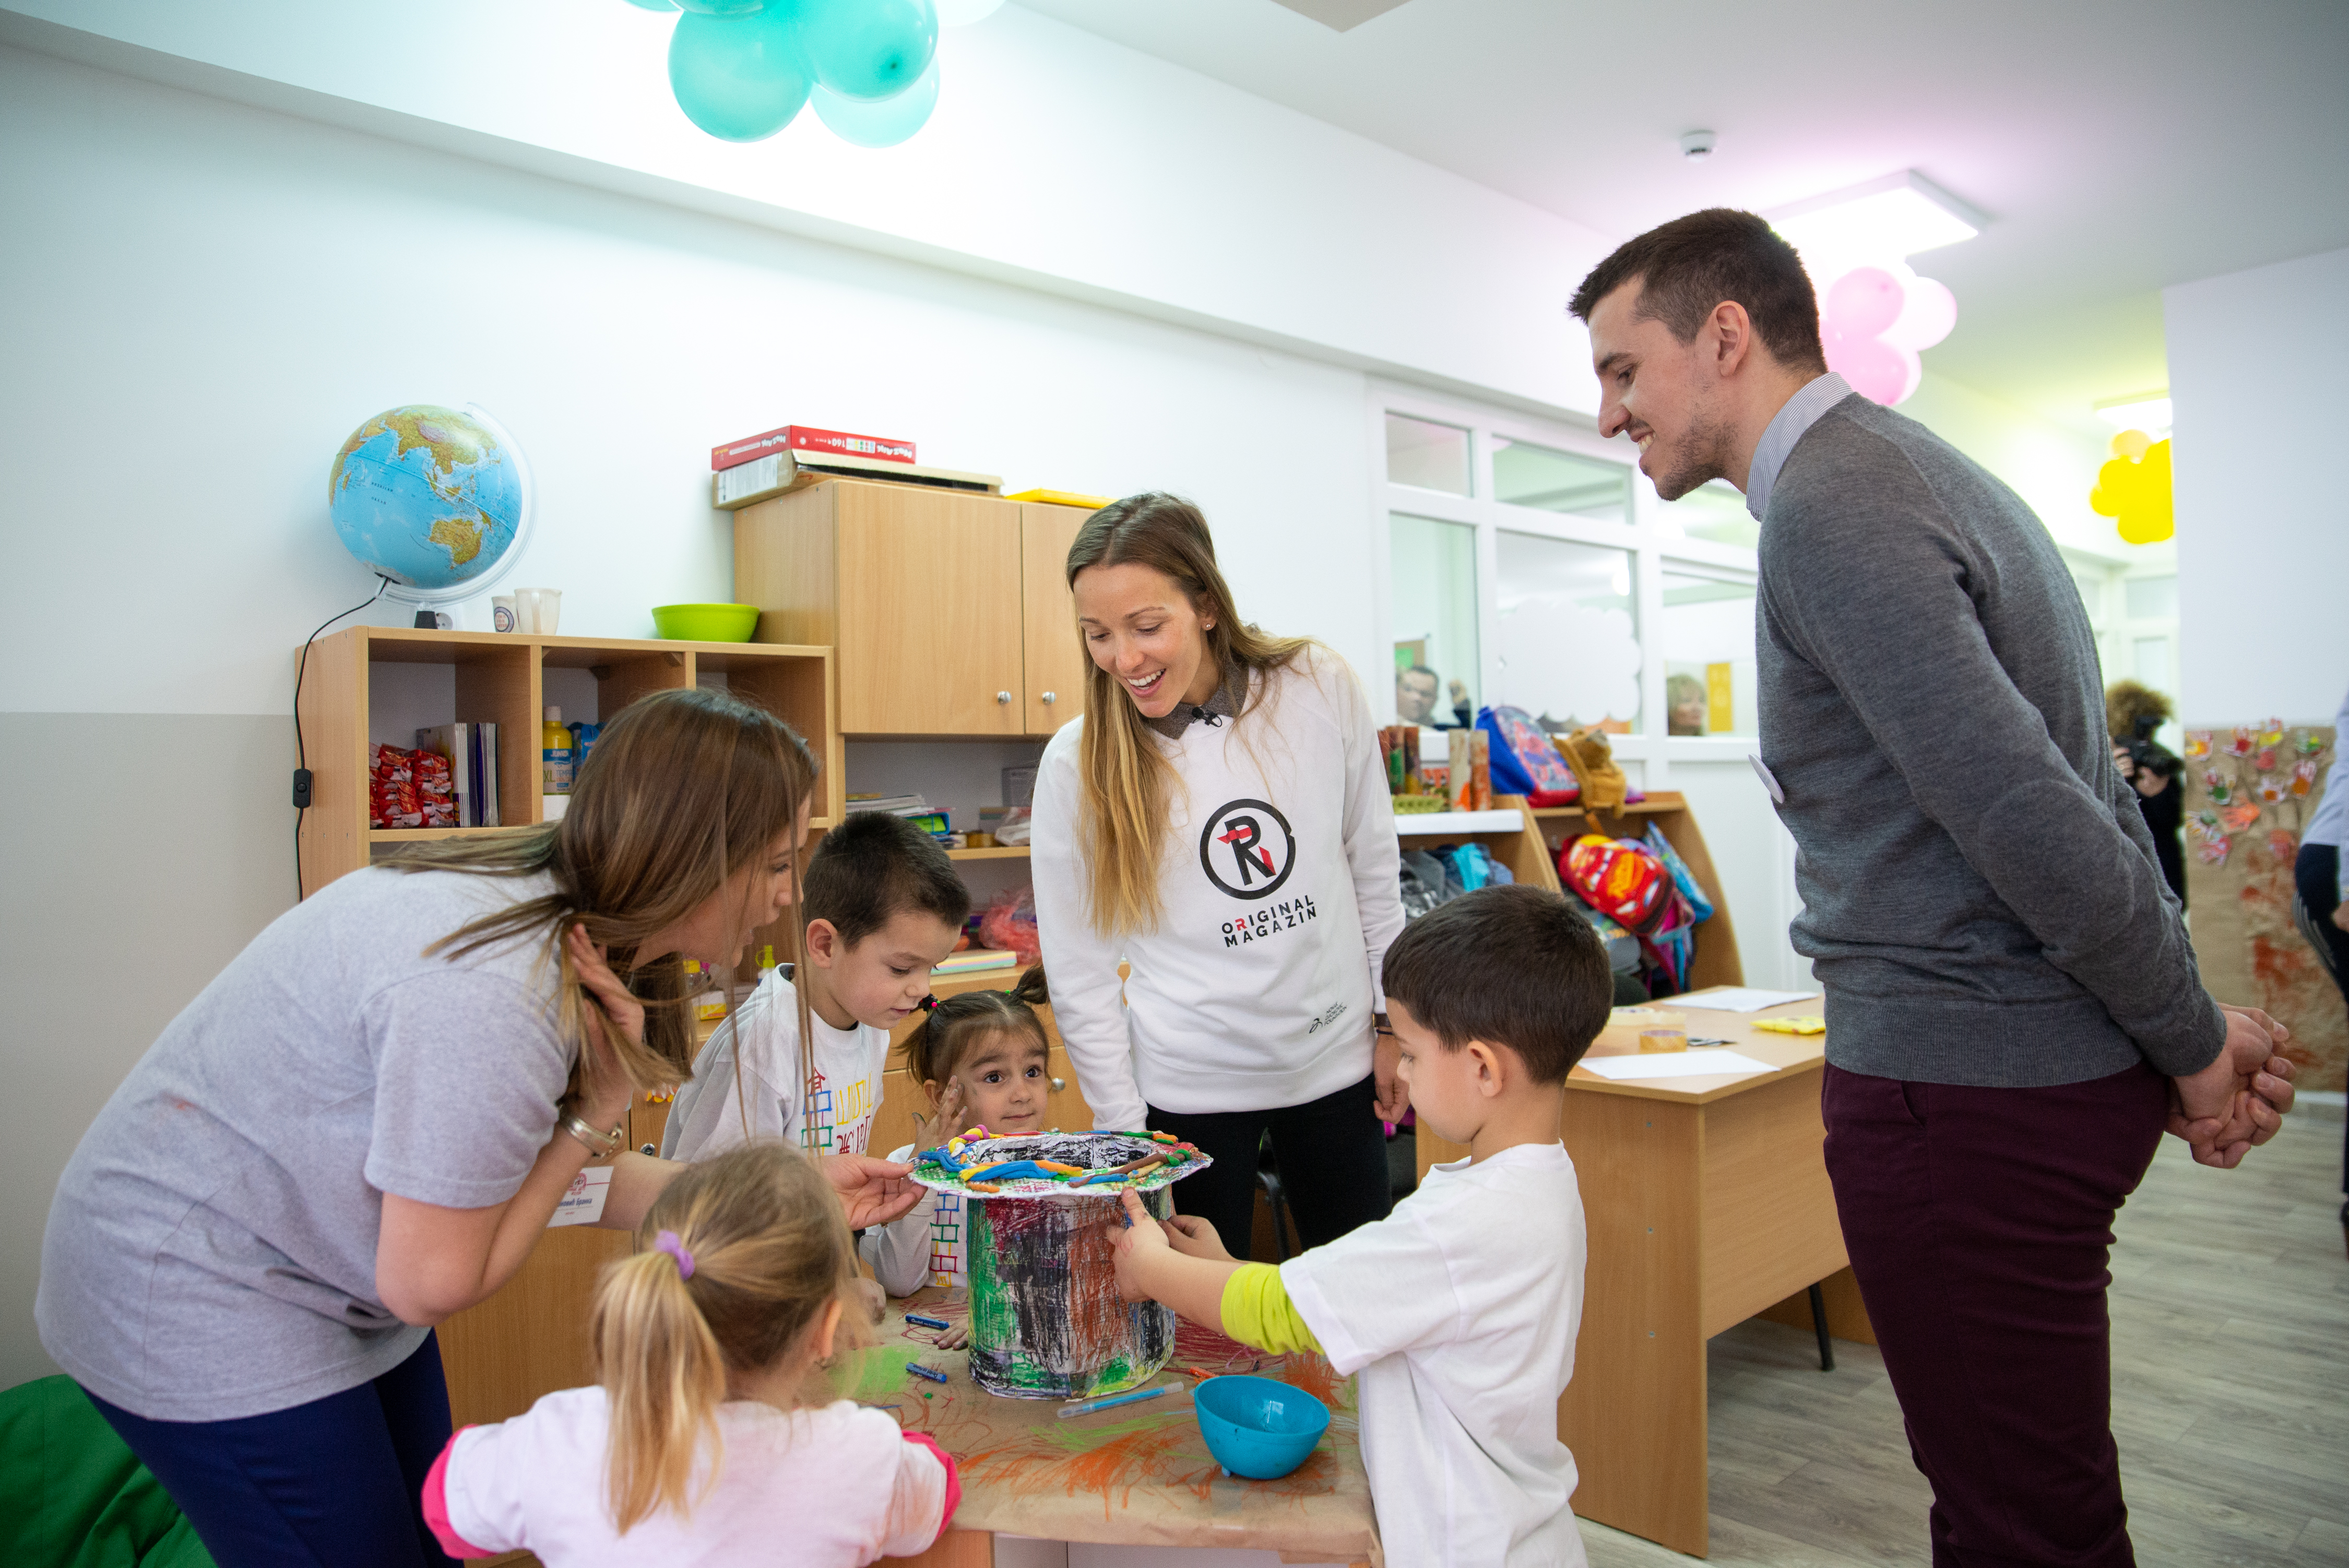 Branka, the teacher (left), Jelena Djokovic (center) and Marko Kovacevic (right) playing with kids during the opening of the kindergarten. 